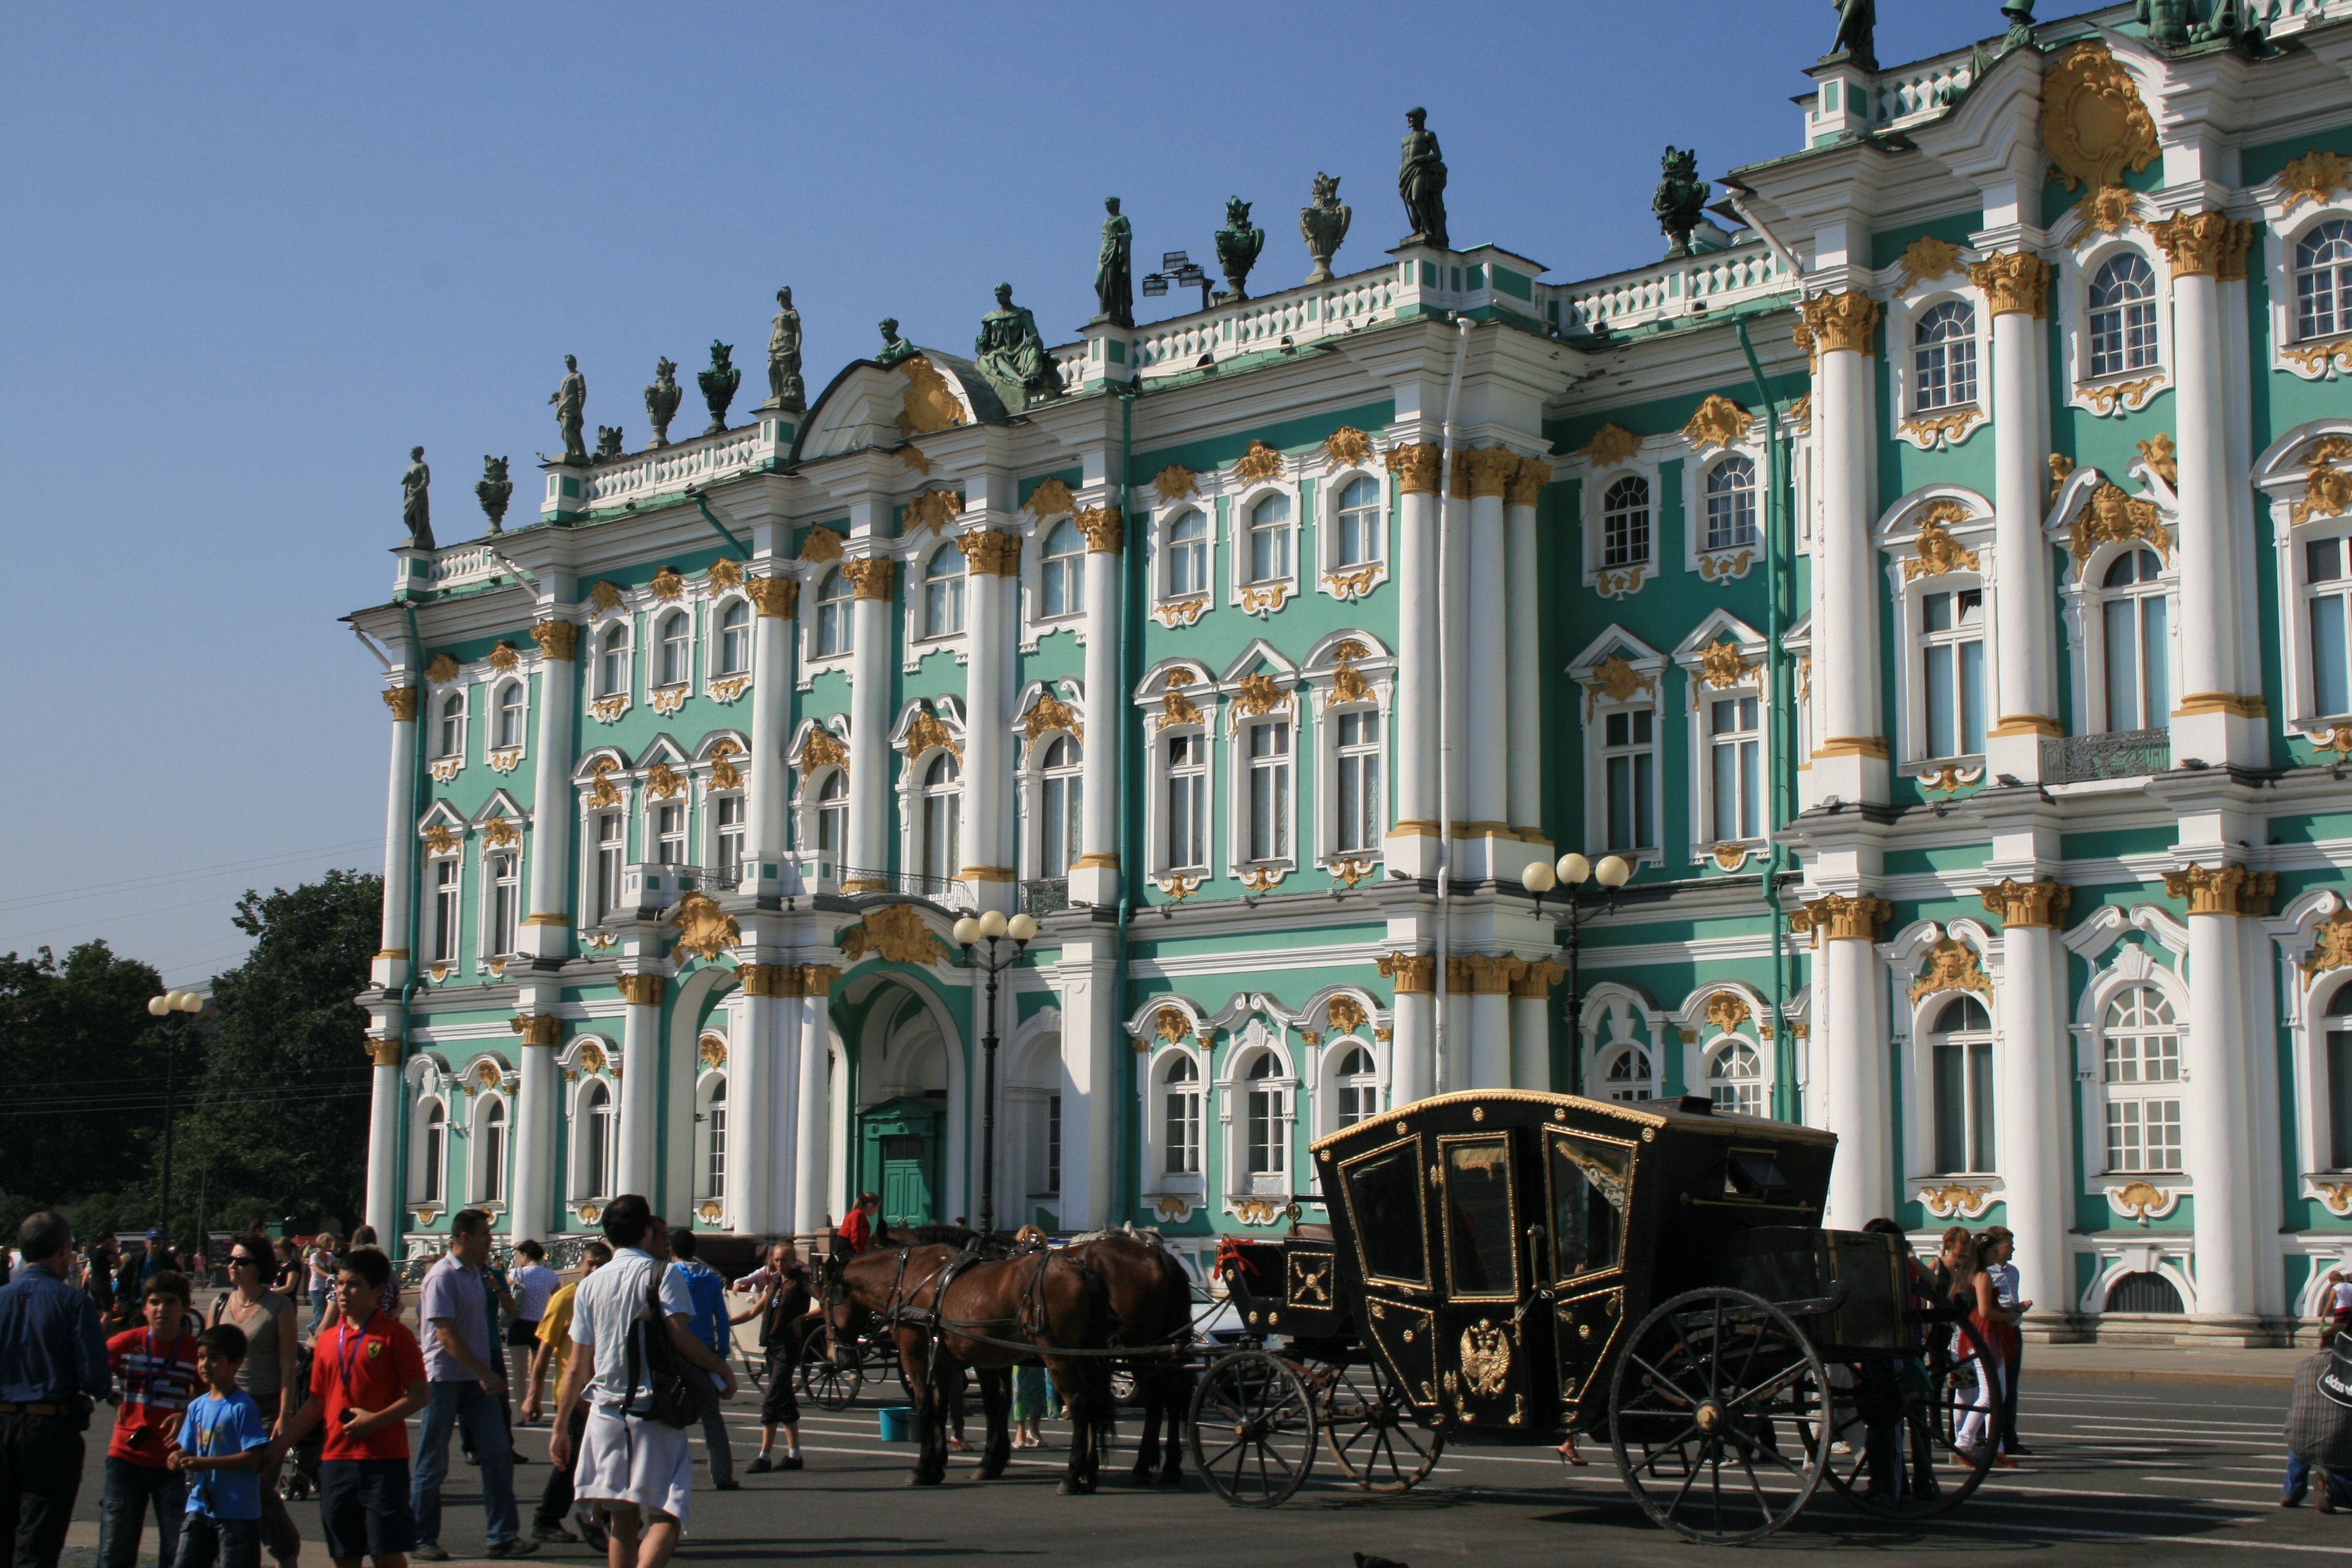 Images of Hermitage Museum | 3888x2592